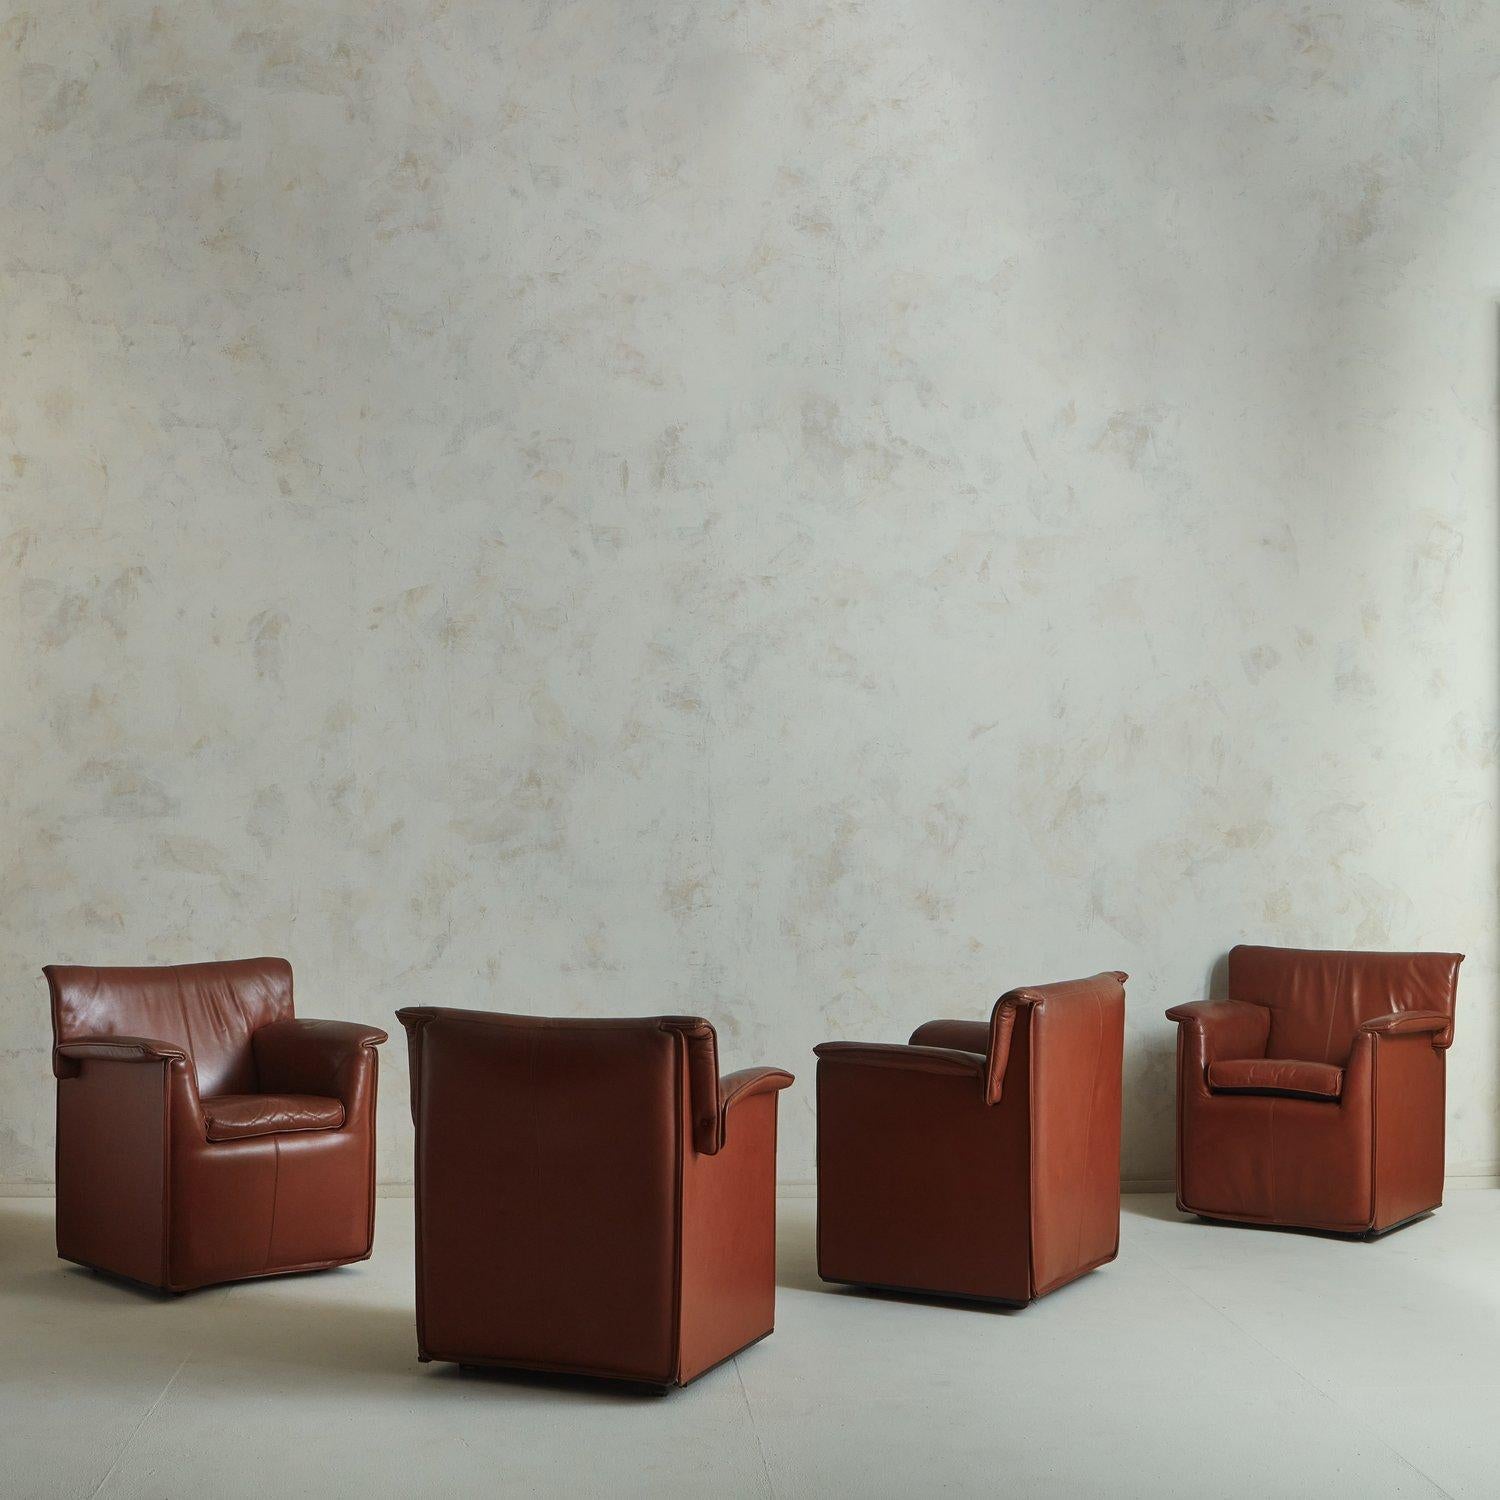 Late 20th Century 'Lauriana' Chair in Cognac Leather By Afra + Tobia Scarpa For B&B Italia 